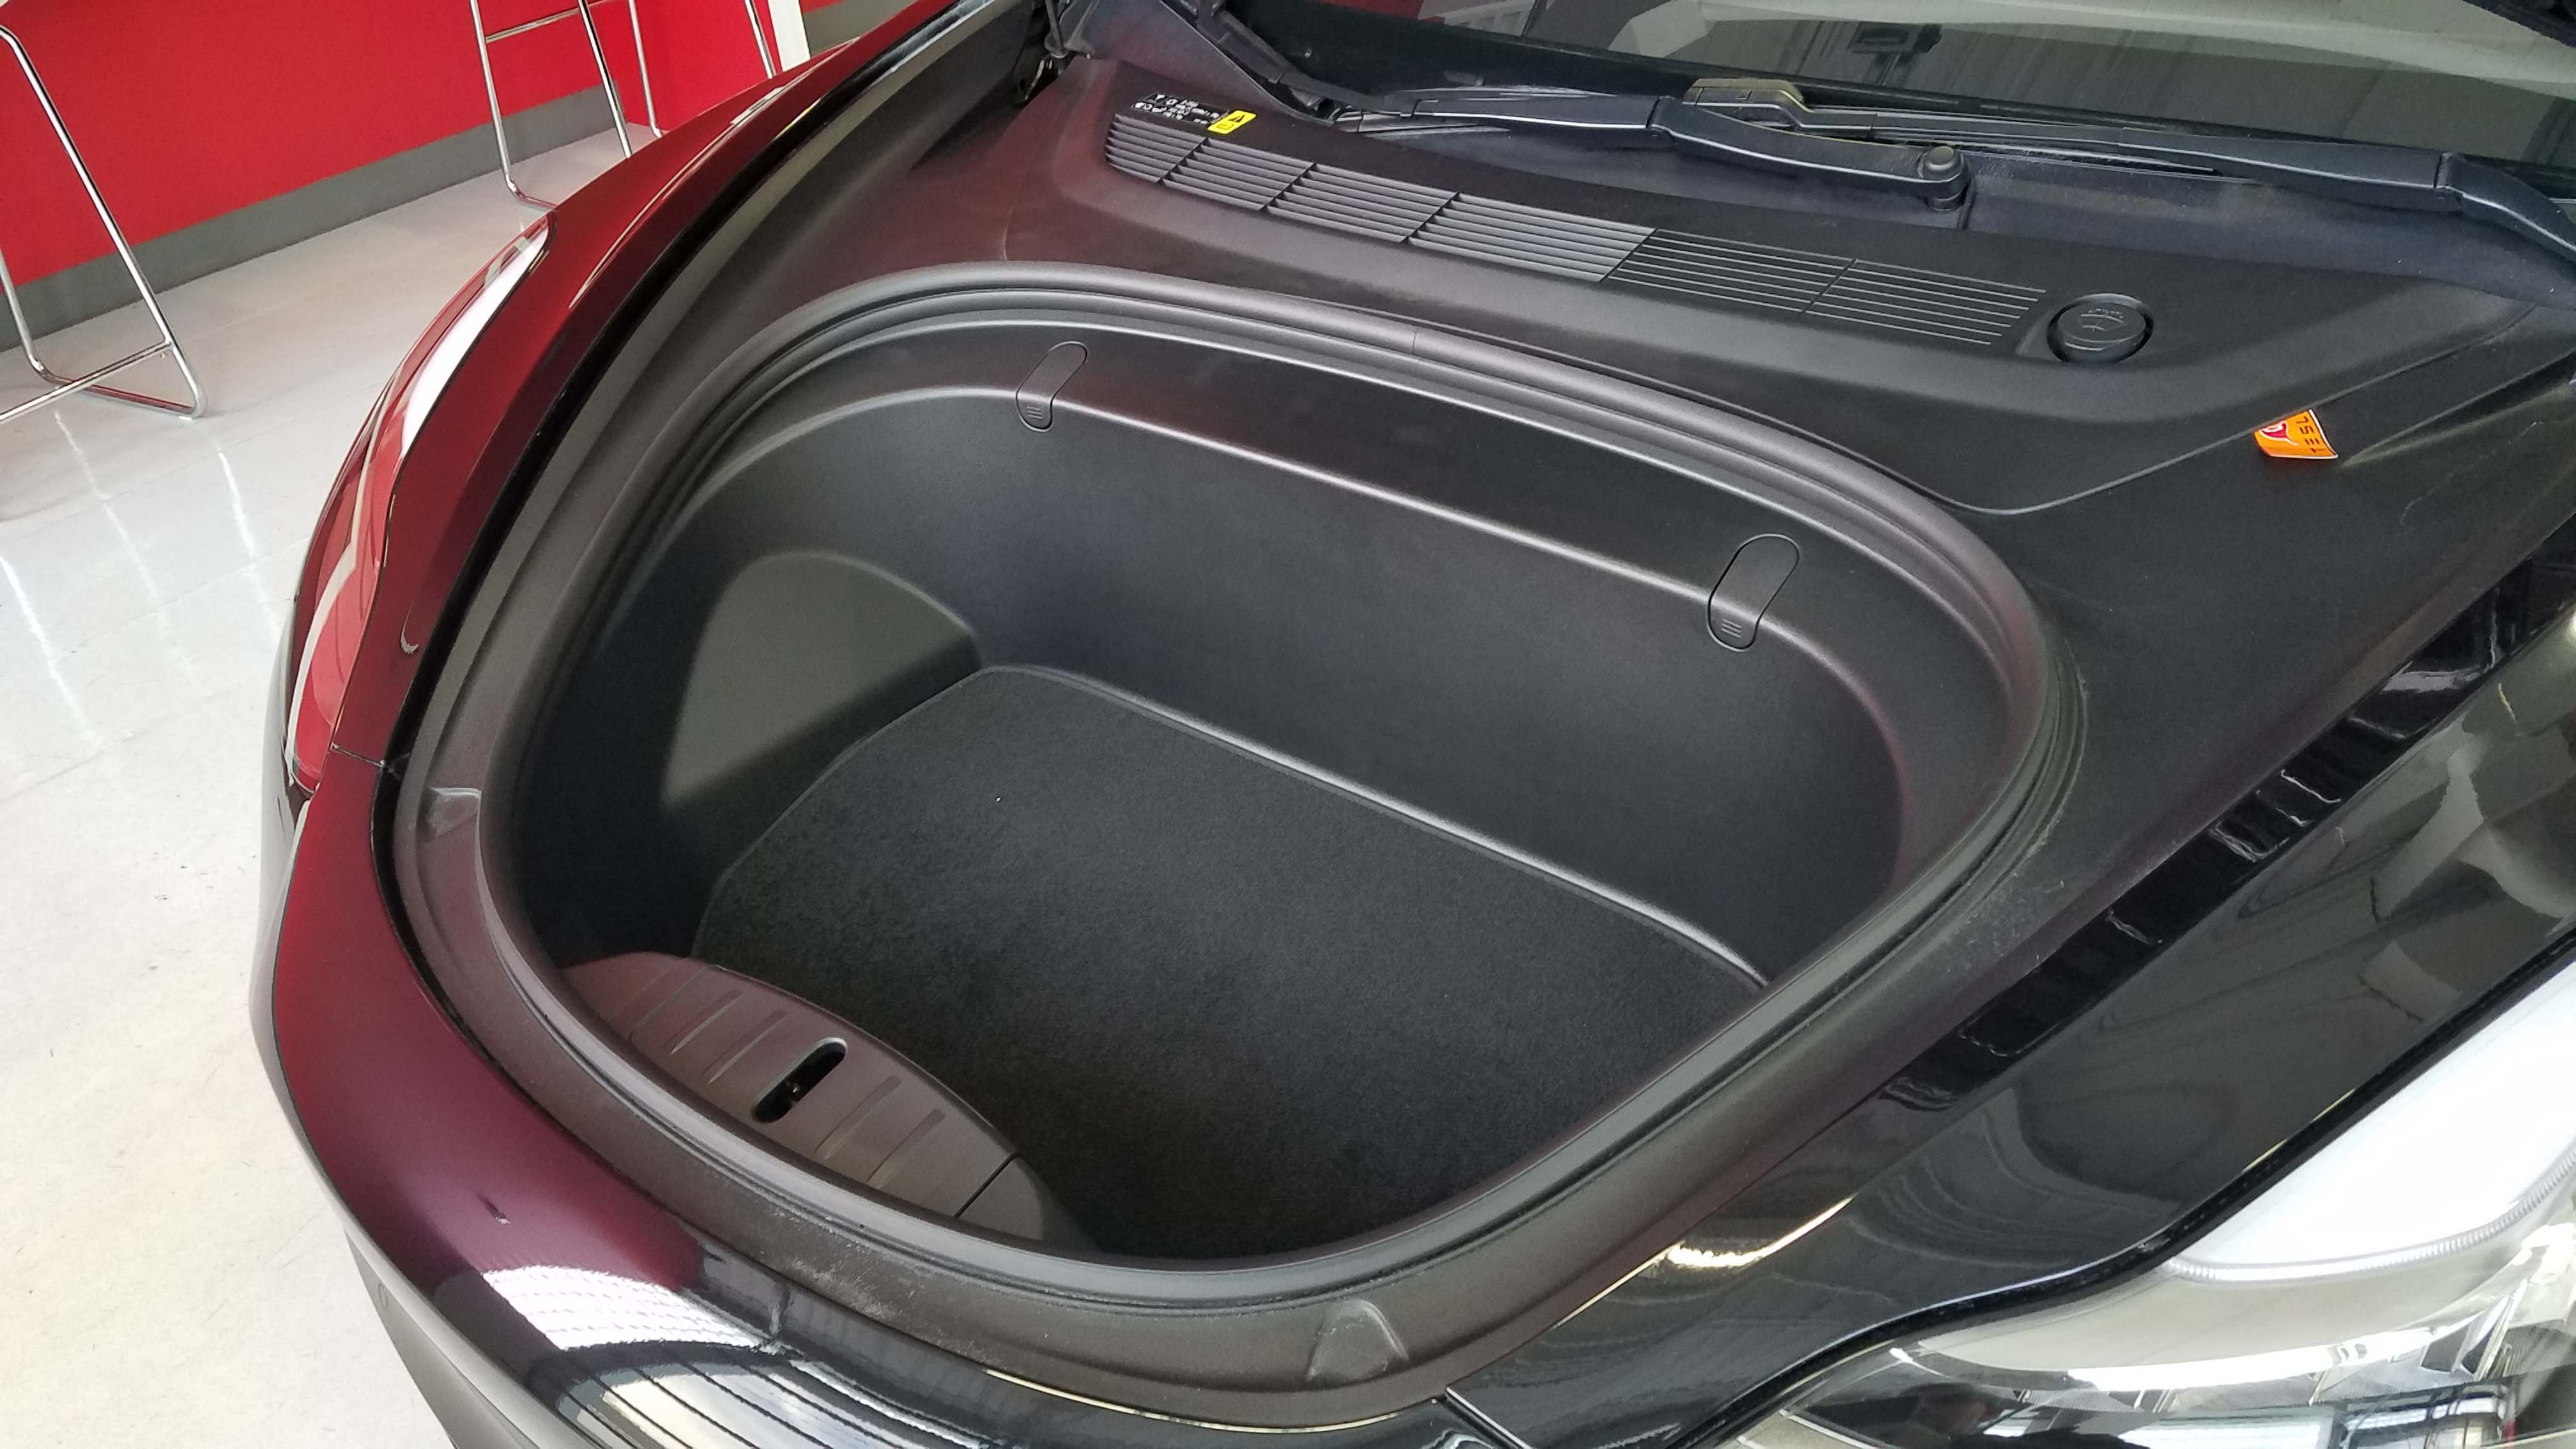 Without an engine in front, the electric Tesla Model 3 features a "frunk" for added storage.